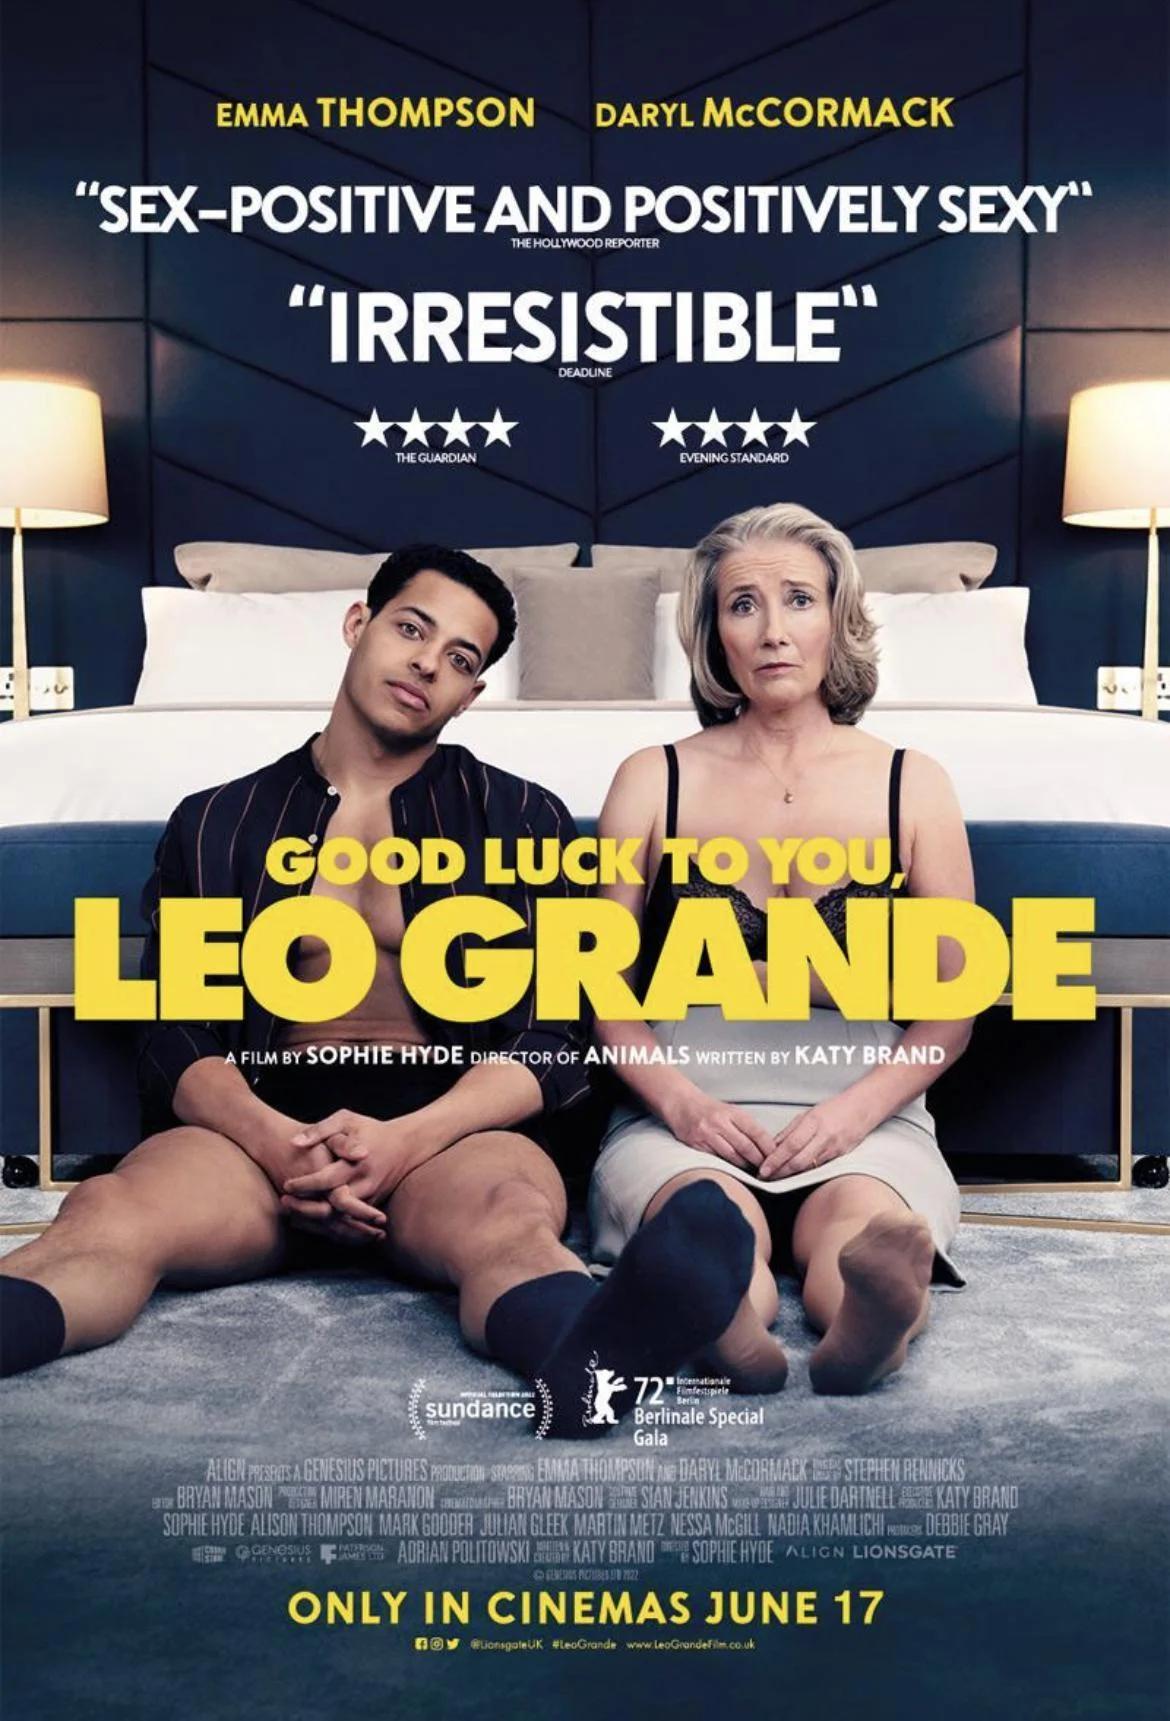 Emma Thompson's Comedy "Good Luck to You, Leo Grande‎" Releases Official Trailer and poster, which will be available on Hulu on June 17